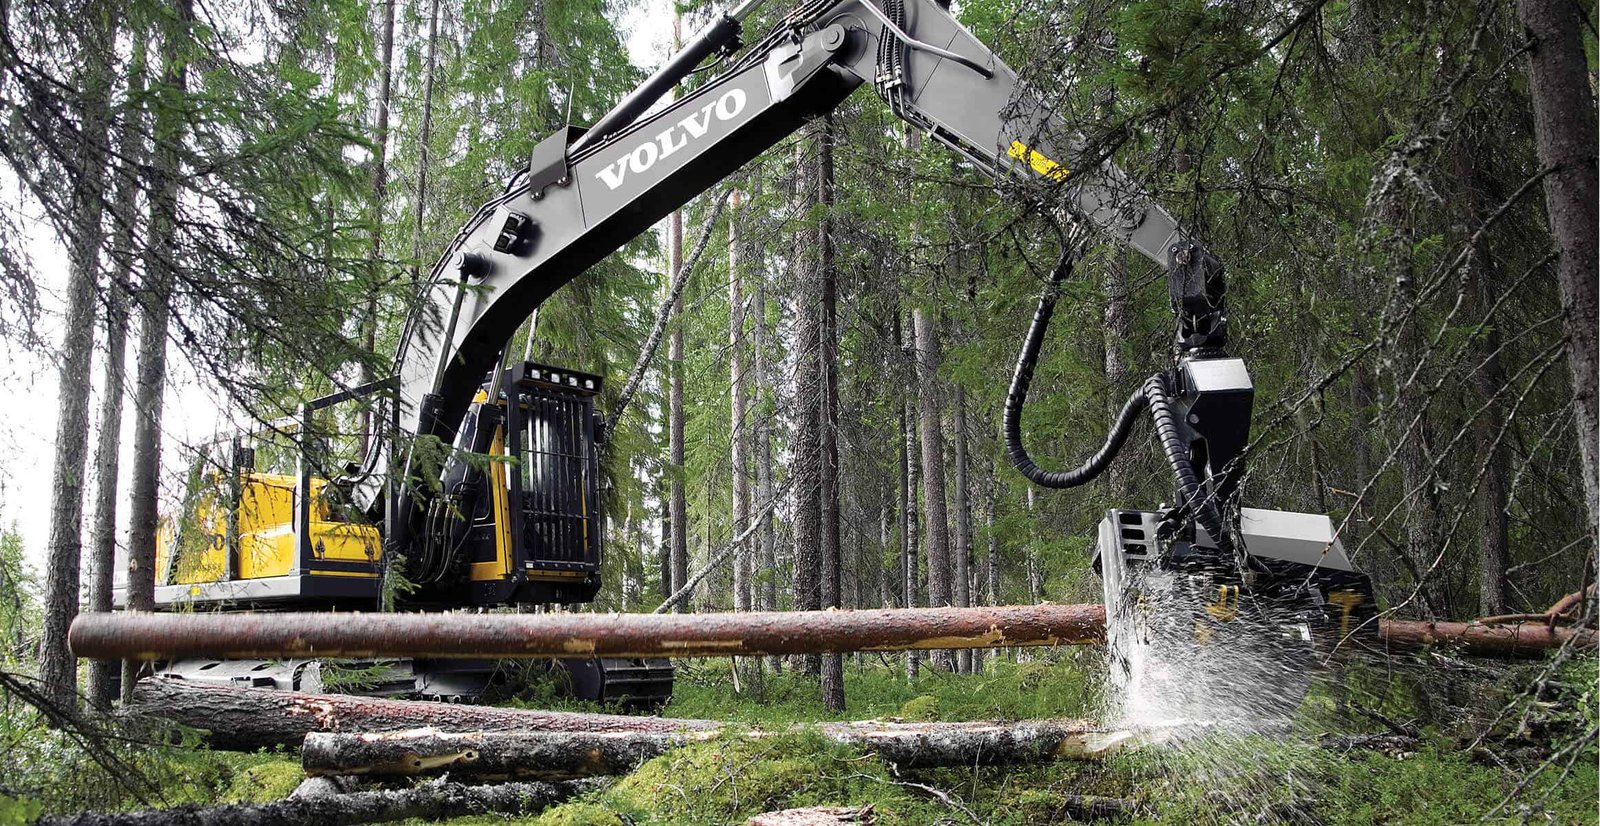 Onsite photograph of crawler excavators during forestry work